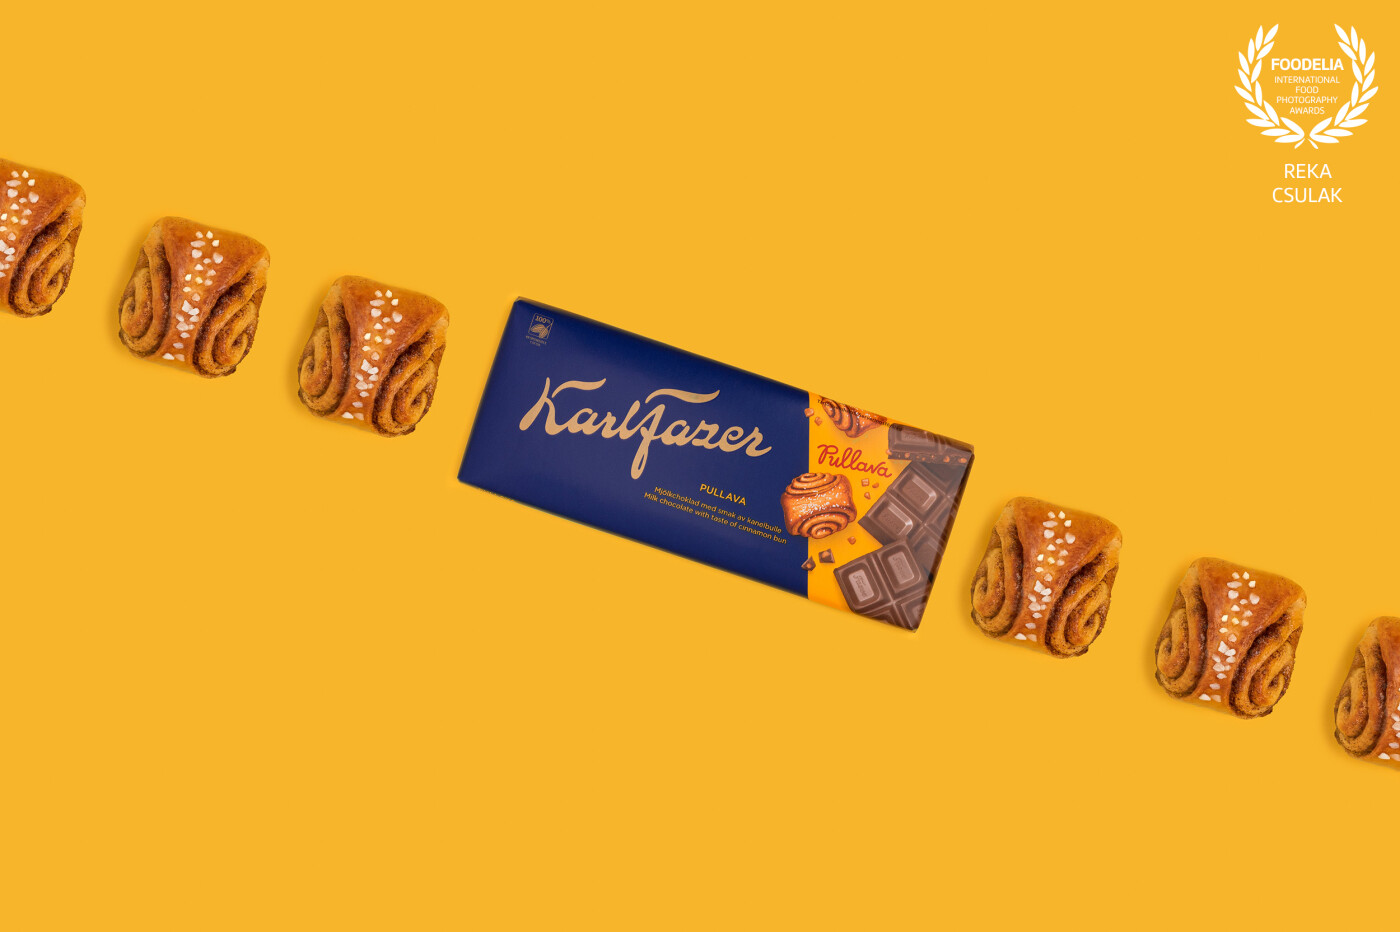 When this top Finnish chocolate brand launched a cinnamon bun-flavoured bar, it became my absolute favourite, and so I dedicated some time to capturing it in a simple yet playful way.